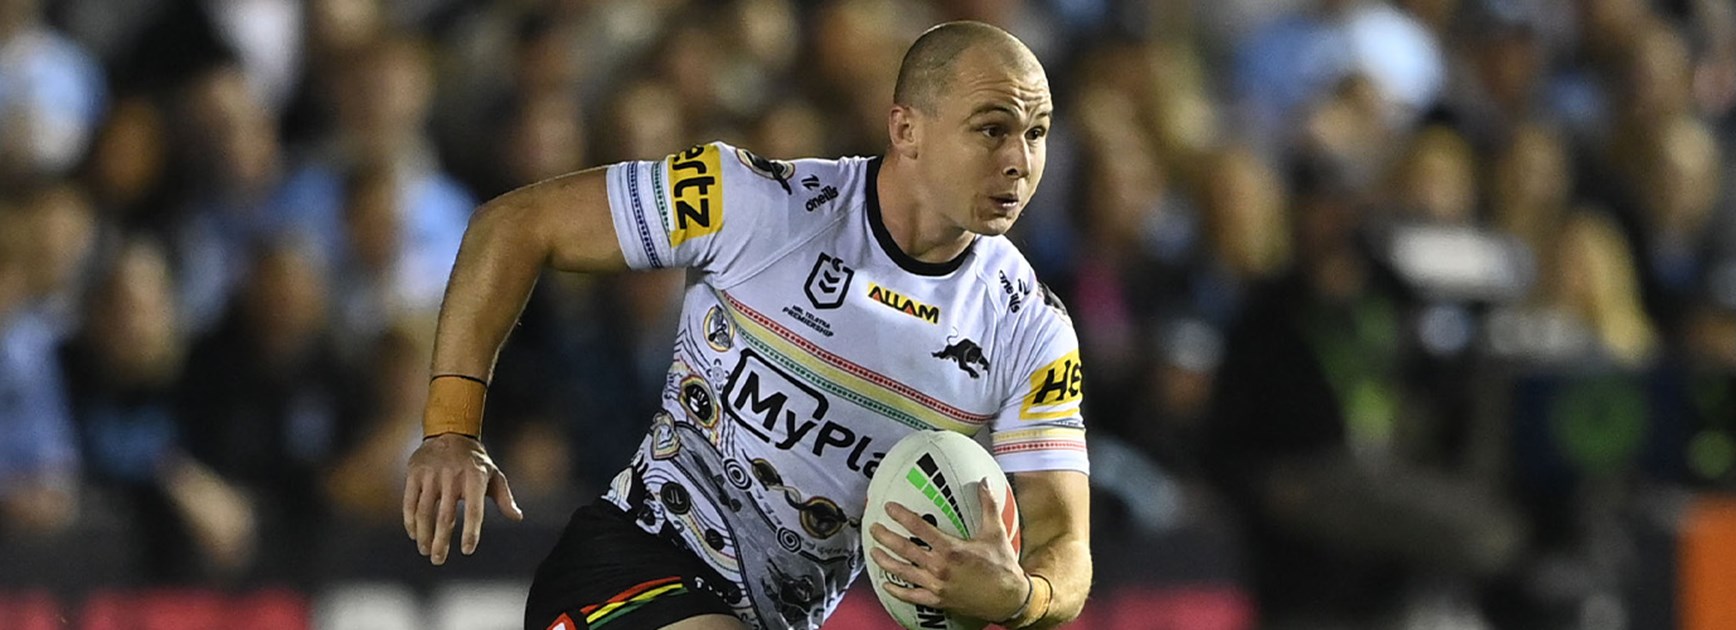 New Blue Dylan leads Dally M race as votes go silent